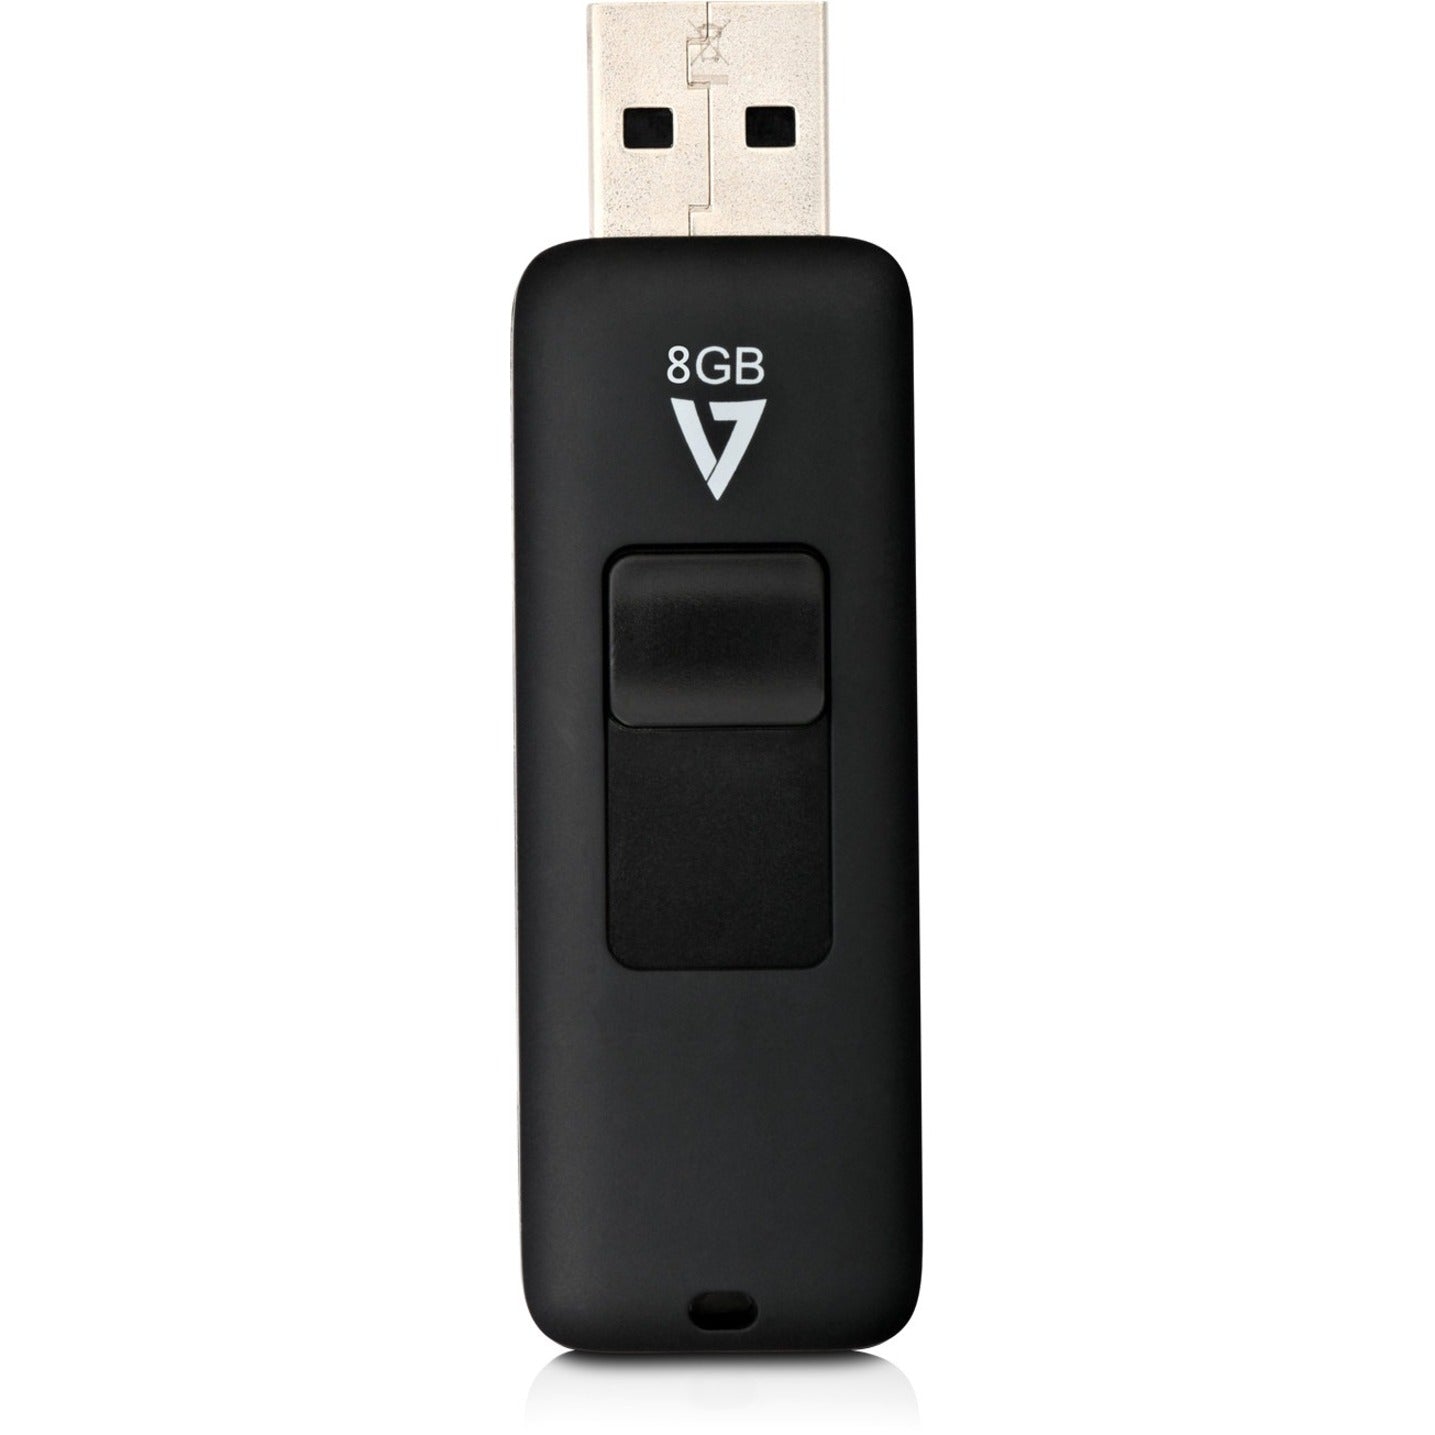 V7 VF28GAR-3N 8GB USB 2.0 Flash Drive - With Retractable USB connector, 5 Year Limited Warranty, RoHS Certified